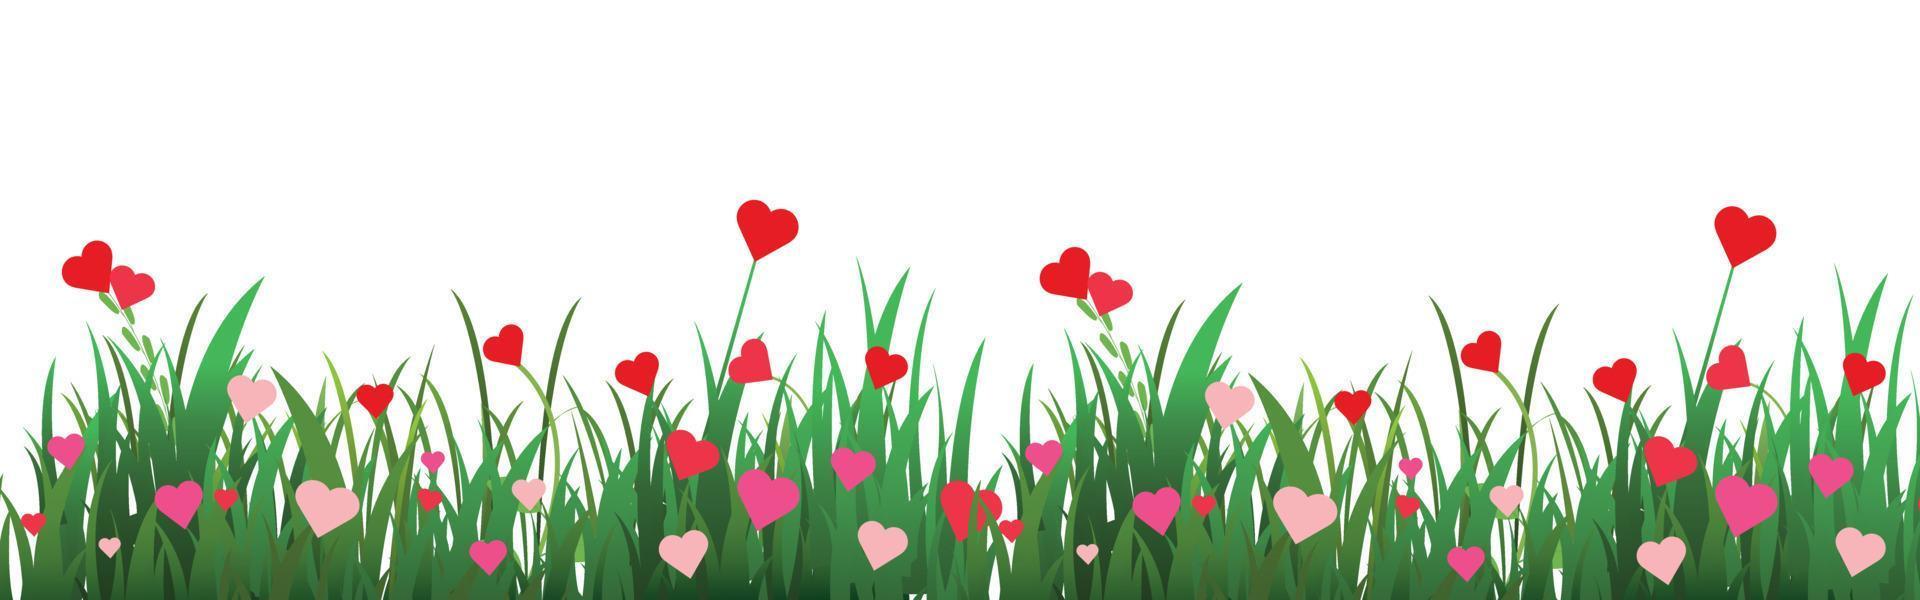 Hearts flowers . Flowers background. Vector illustration.